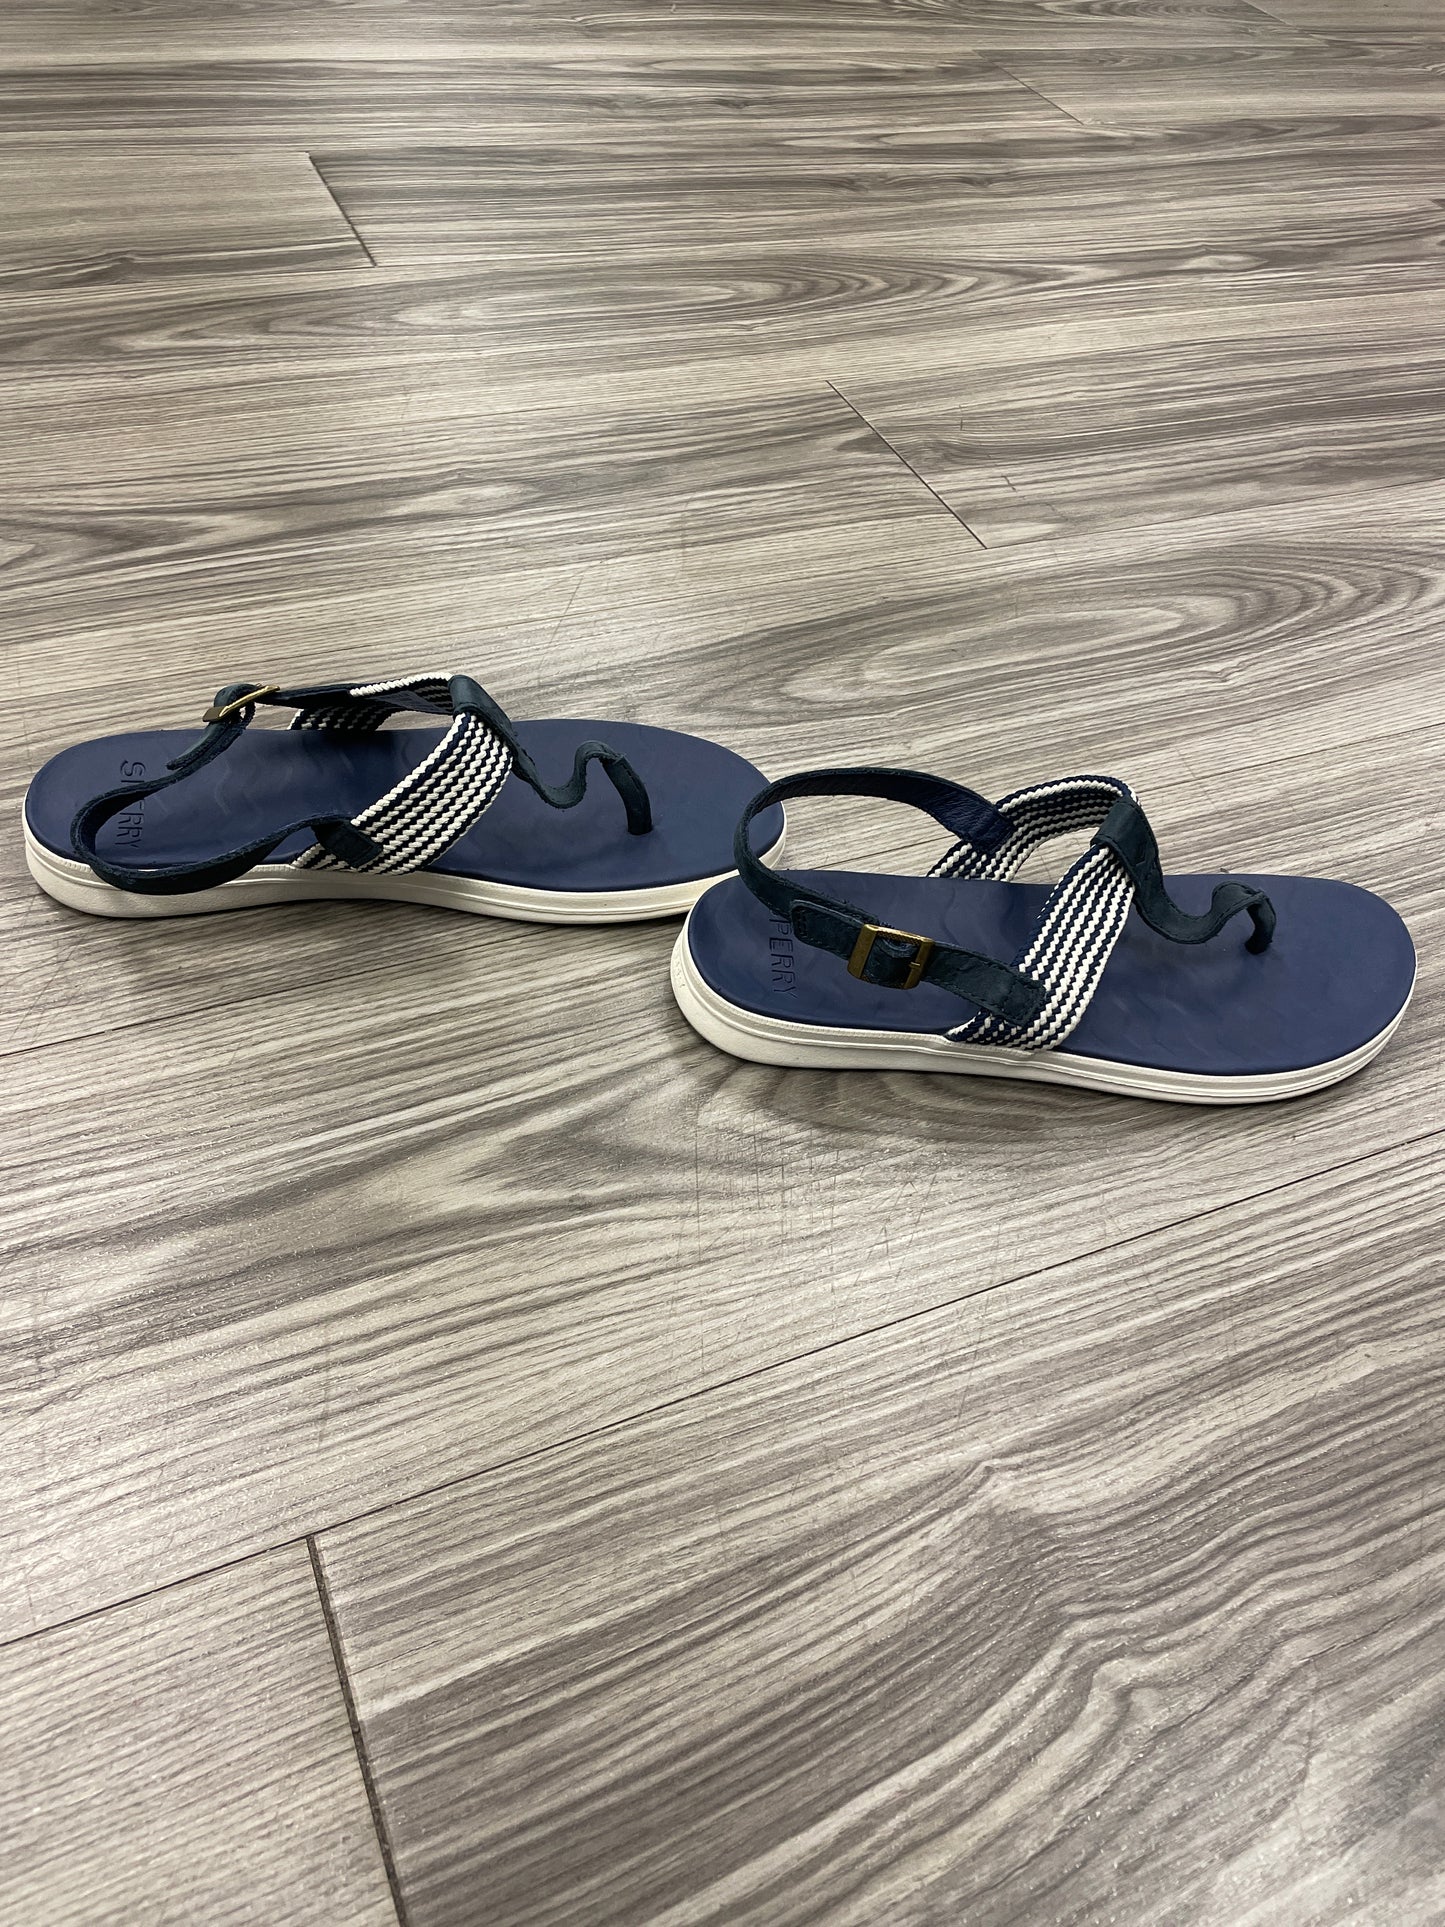 Sandals Flip Flops By Sperry  Size: 8.5